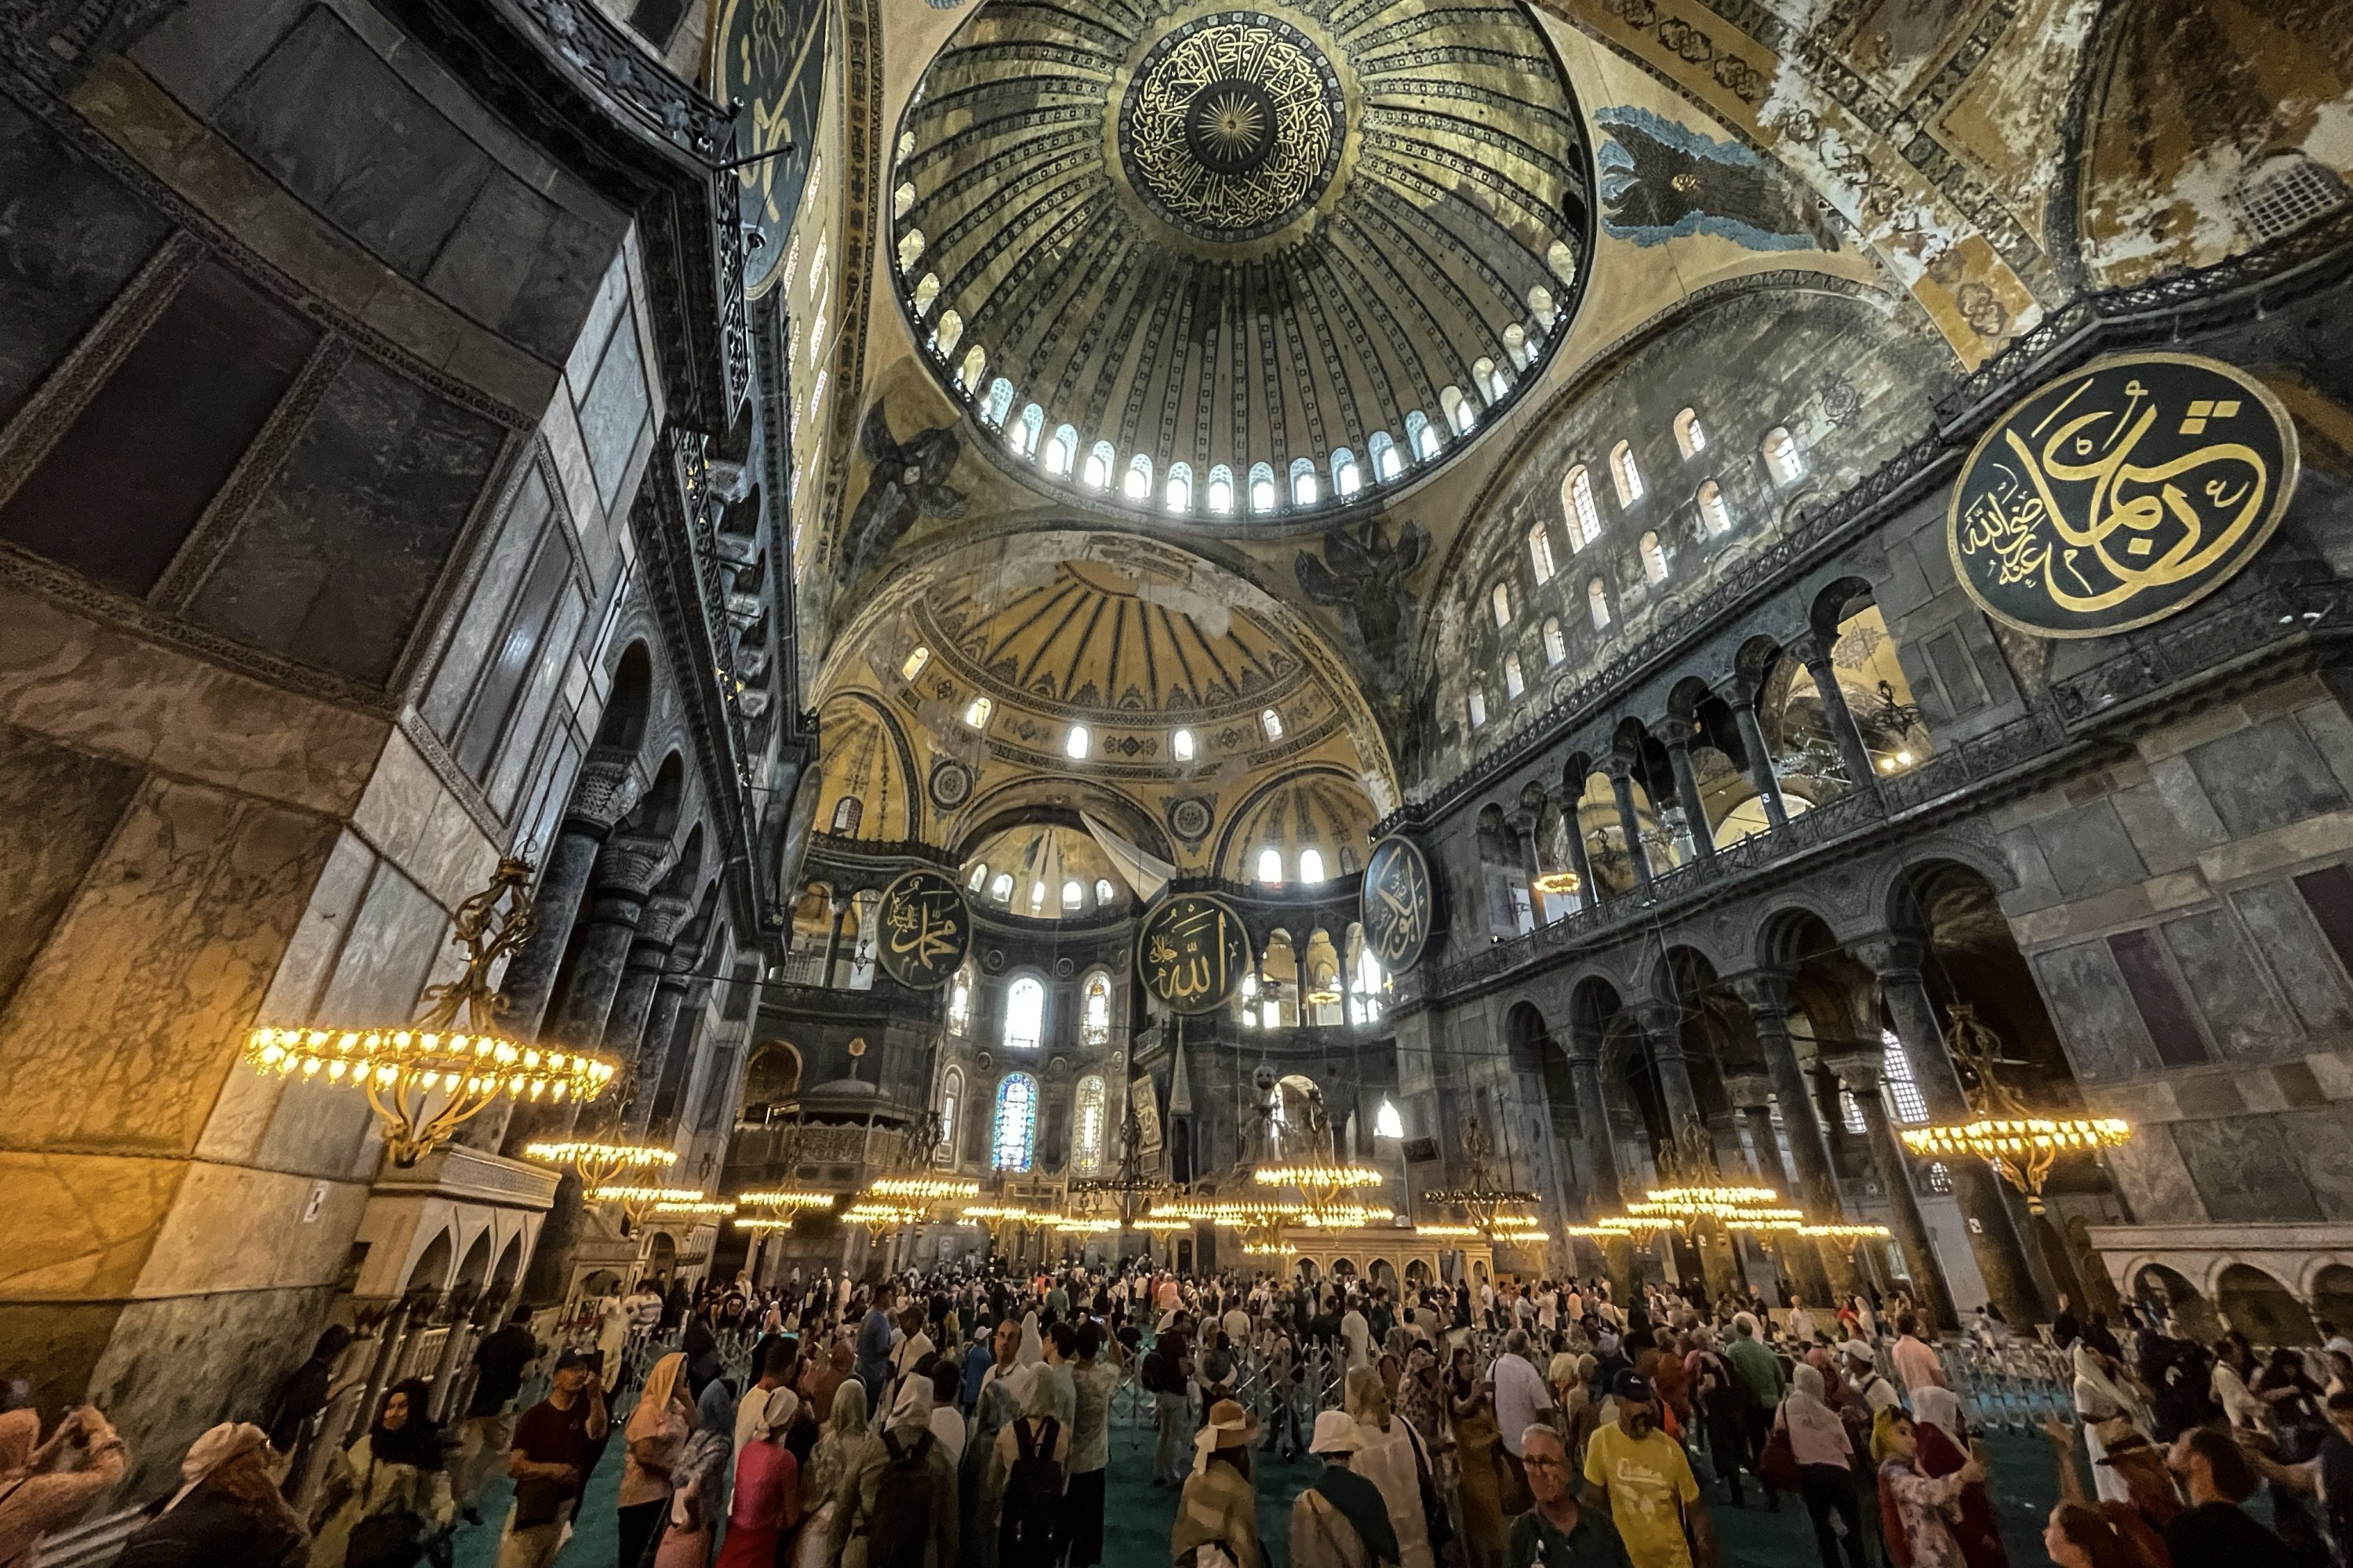 6.5 million people flock to Hagia Sophia Mosque in 2 years | Daily ...